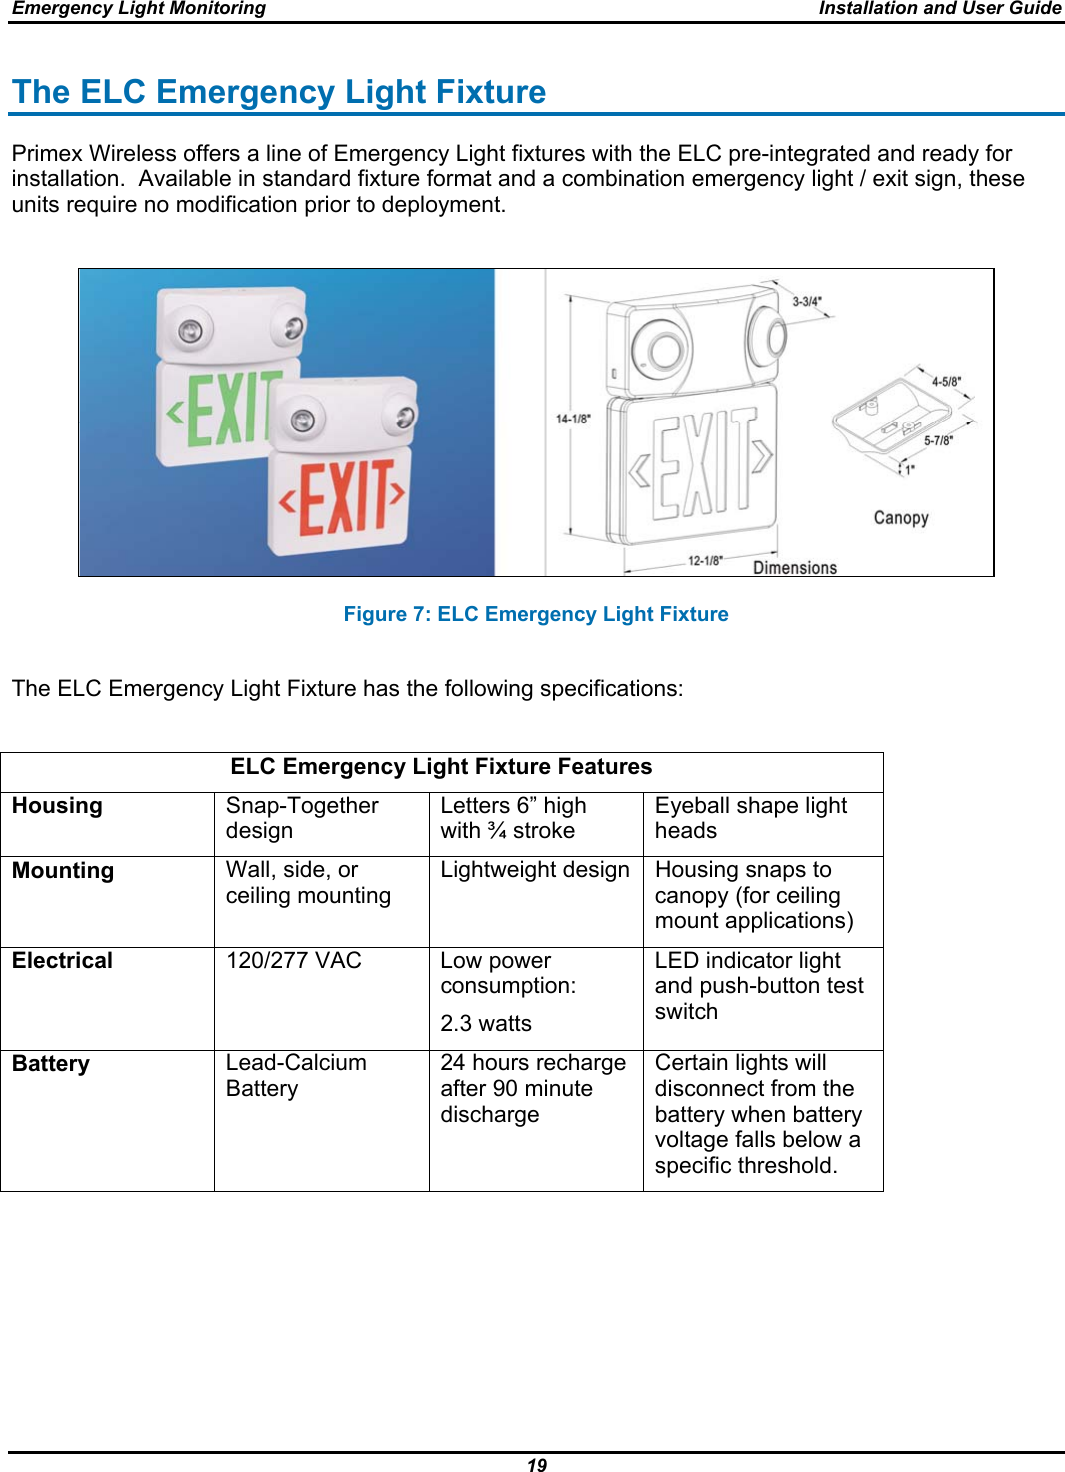 Emergency Light Monitoring  Installation and User Guide 19  The ELC Emergency Light Fixture Primex Wireless offers a line of Emergency Light fixtures with the ELC pre-integrated and ready for installation.  Available in standard fixture format and a combination emergency light / exit sign, these units require no modification prior to deployment.   Figure 7: ELC Emergency Light Fixture  The ELC Emergency Light Fixture has the following specifications:  ELC Emergency Light Fixture Features Housing  Snap-Together design Letters 6” high with ¾ stroke Eyeball shape light heads Mounting  Wall, side, or ceiling mounting Lightweight design  Housing snaps to canopy (for ceiling mount applications) Electrical  120/277 VAC   Low power consumption: 2.3 watts LED indicator light and push-button test switch Battery  Lead-Calcium Battery 24 hours recharge after 90 minute discharge Certain lights will disconnect from the battery when battery voltage falls below a specific threshold.           